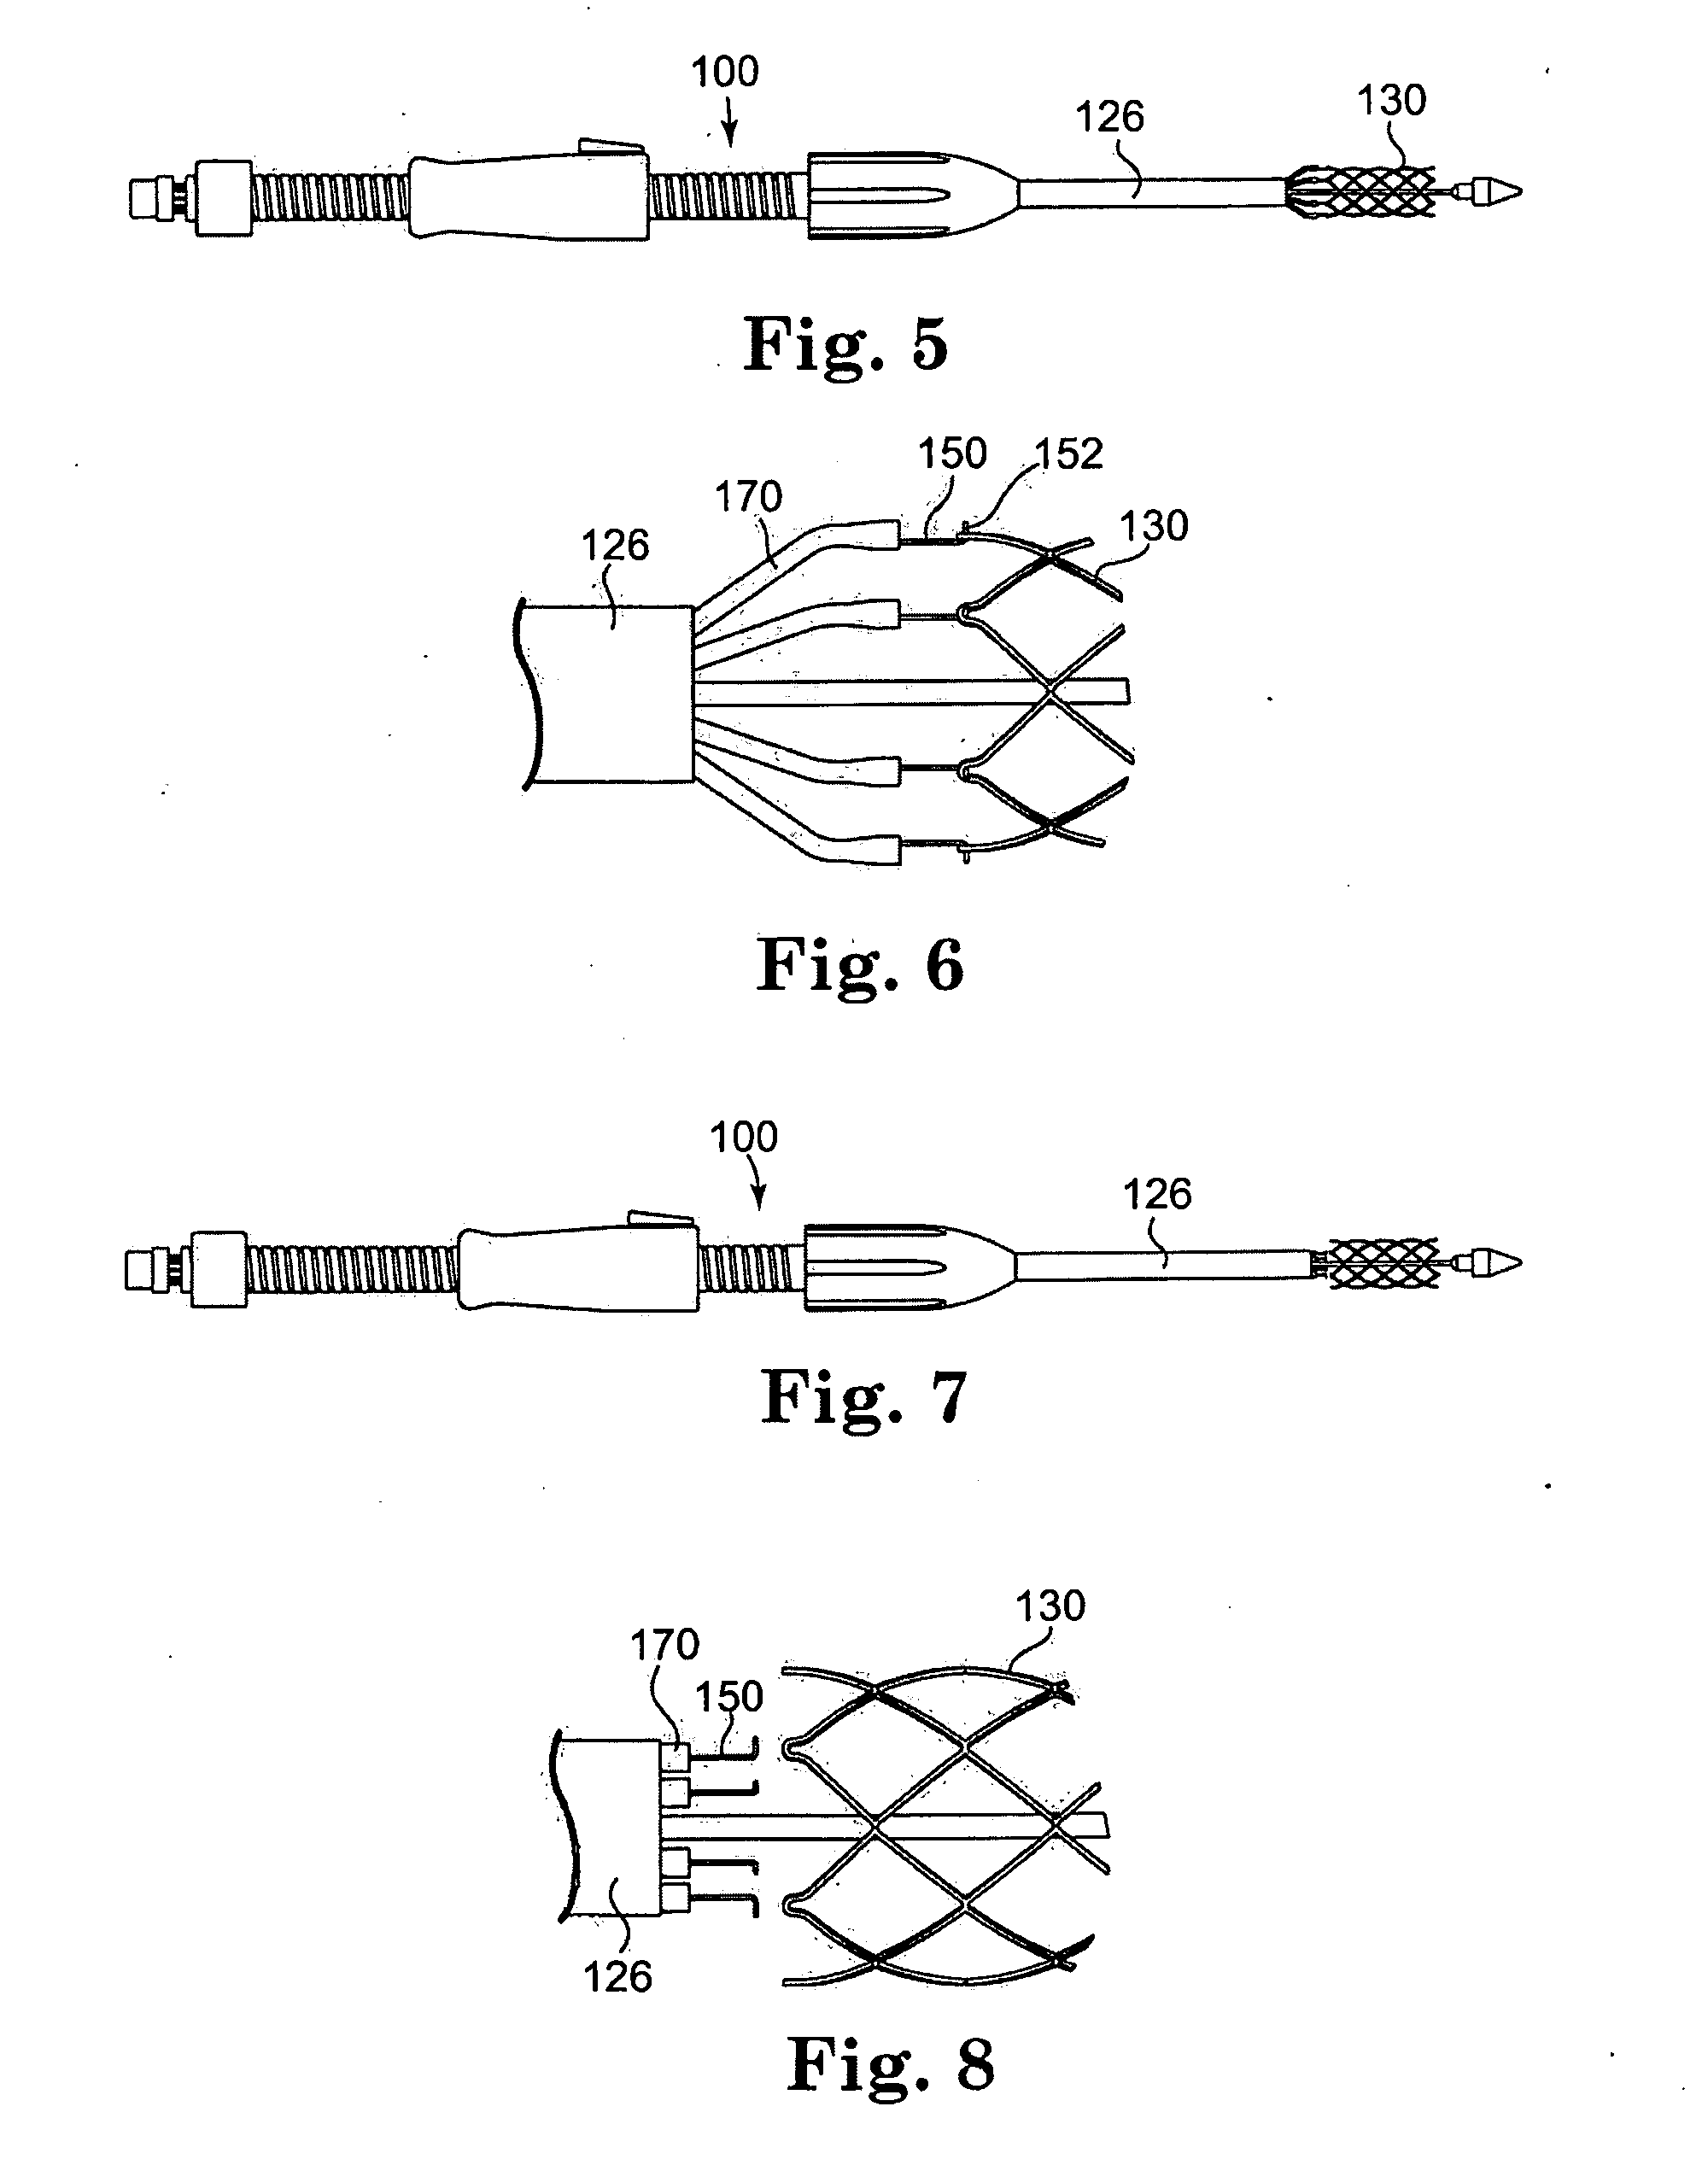 Delivery Systems and Methods of Implantation for Prosthetic Heart Valves